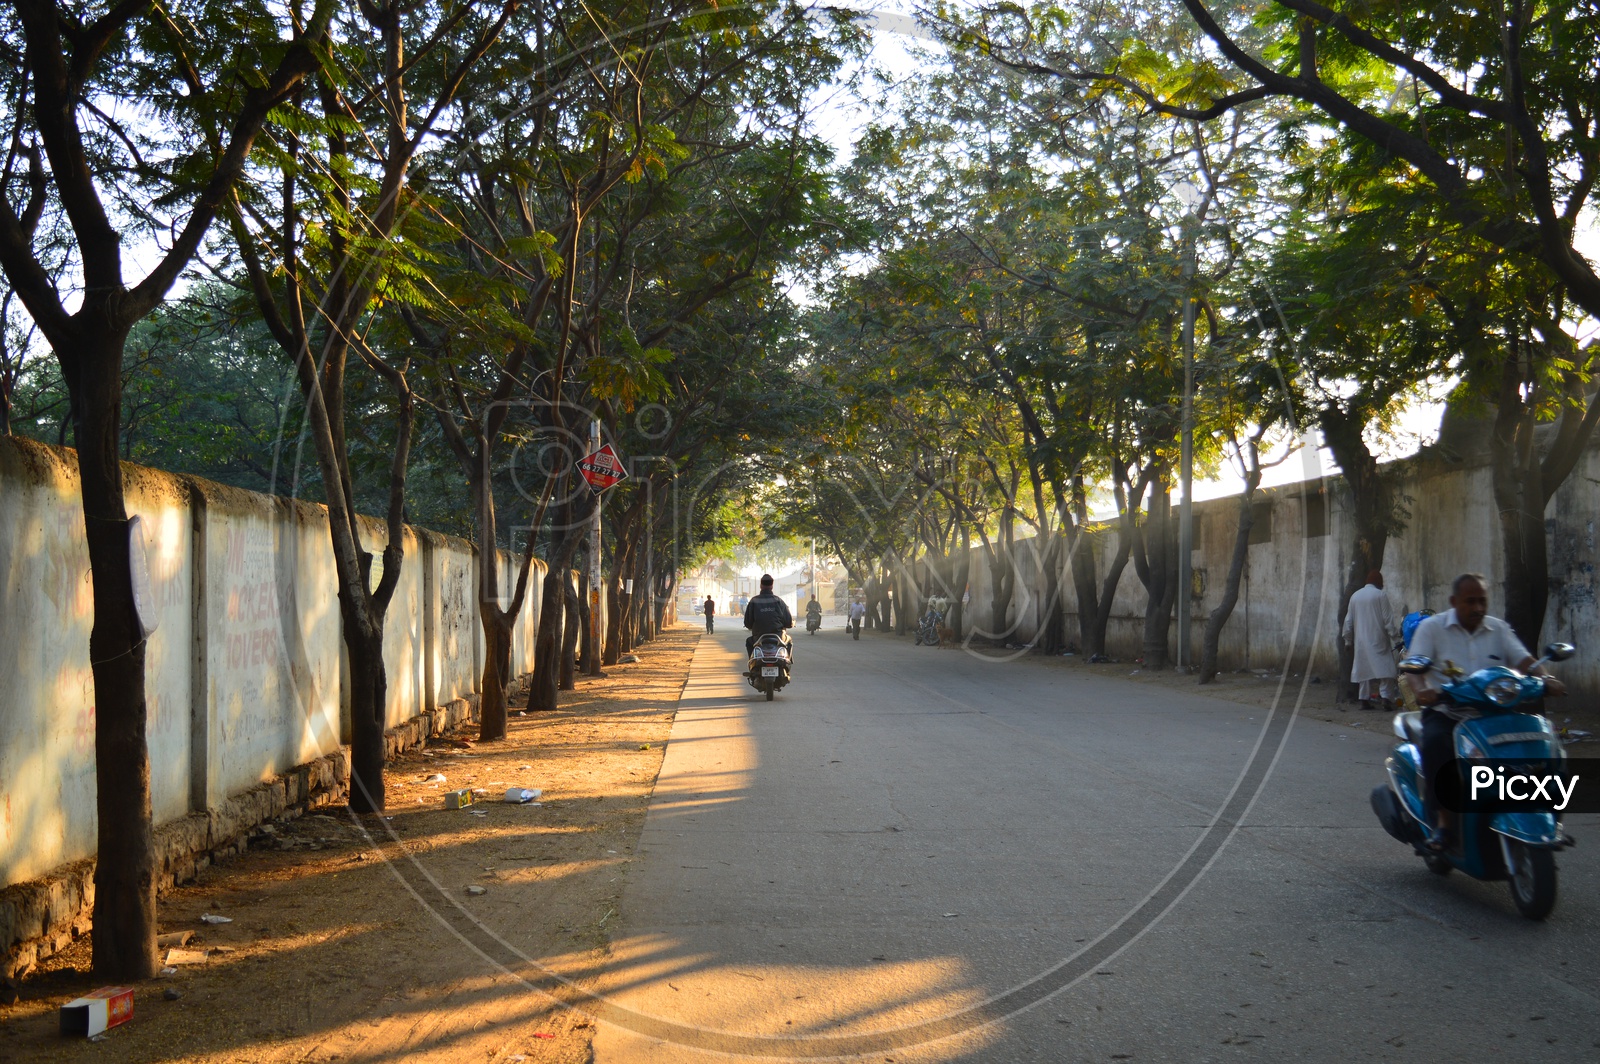 A view of road with trees along side